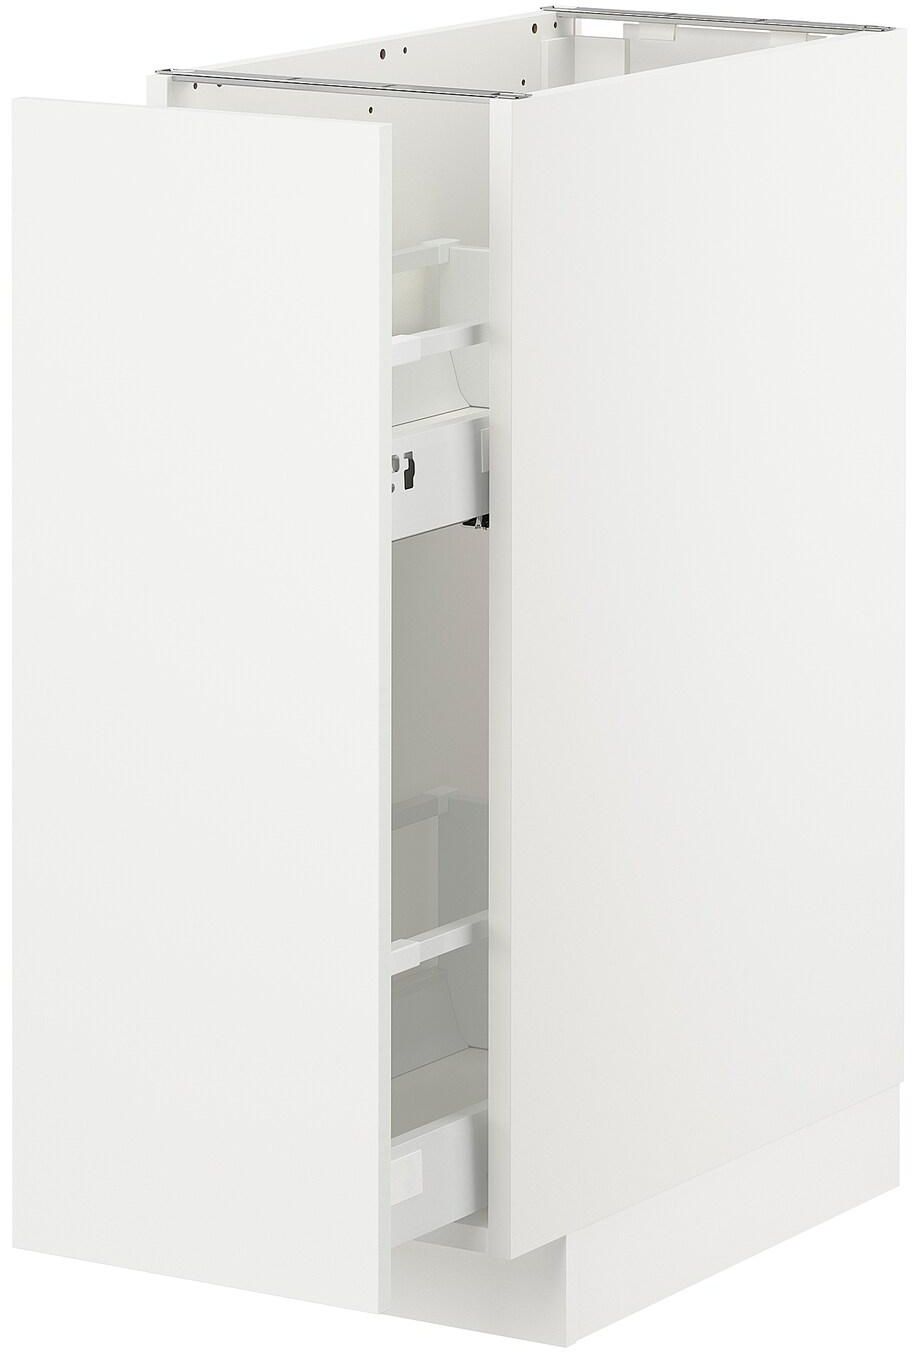 METOD Base cabinet/pull-out int fittings, white, Häggeby white, 30x60 cm